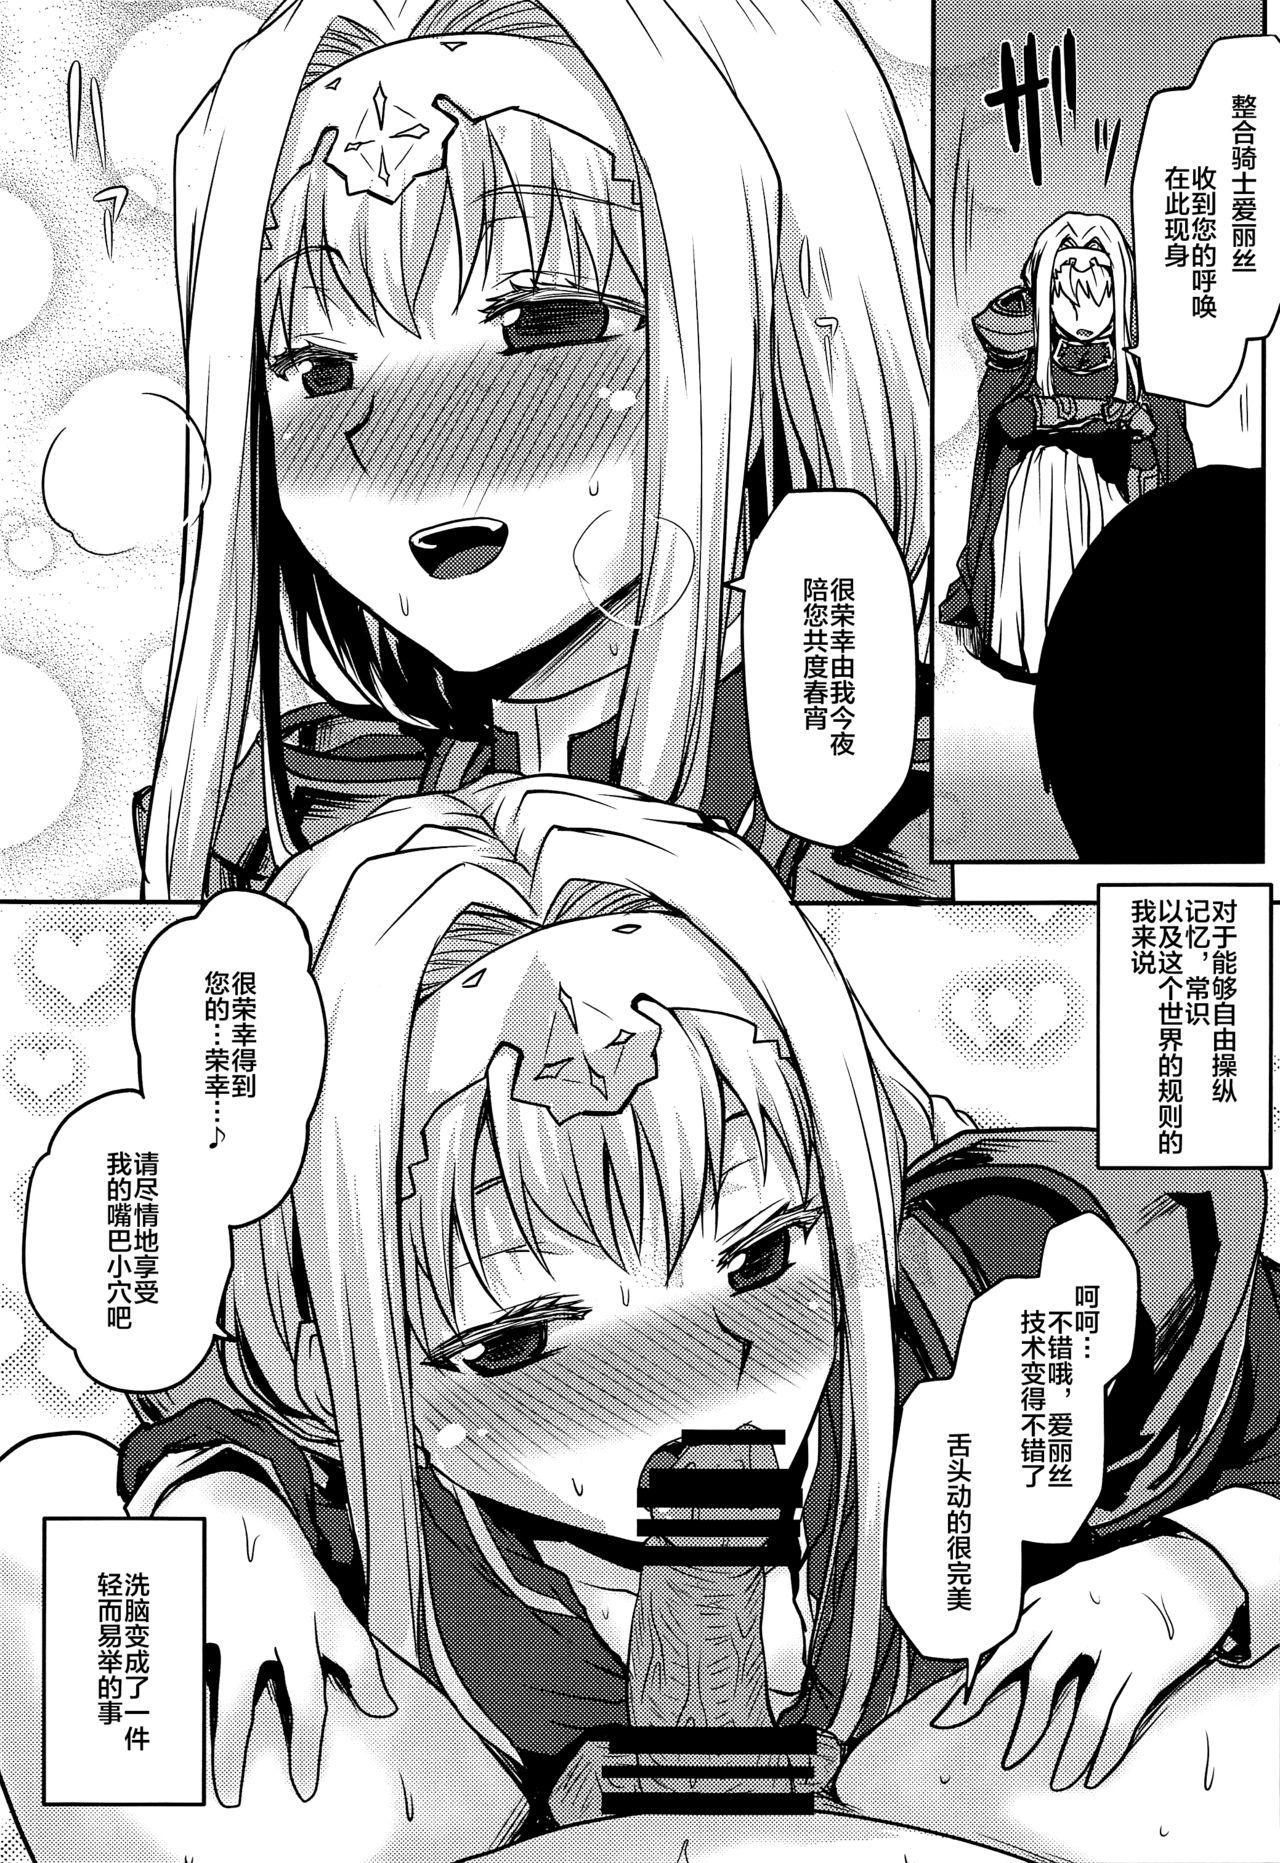 Old And Young Omodume BOX 48 - Sword art online Cut - Page 10